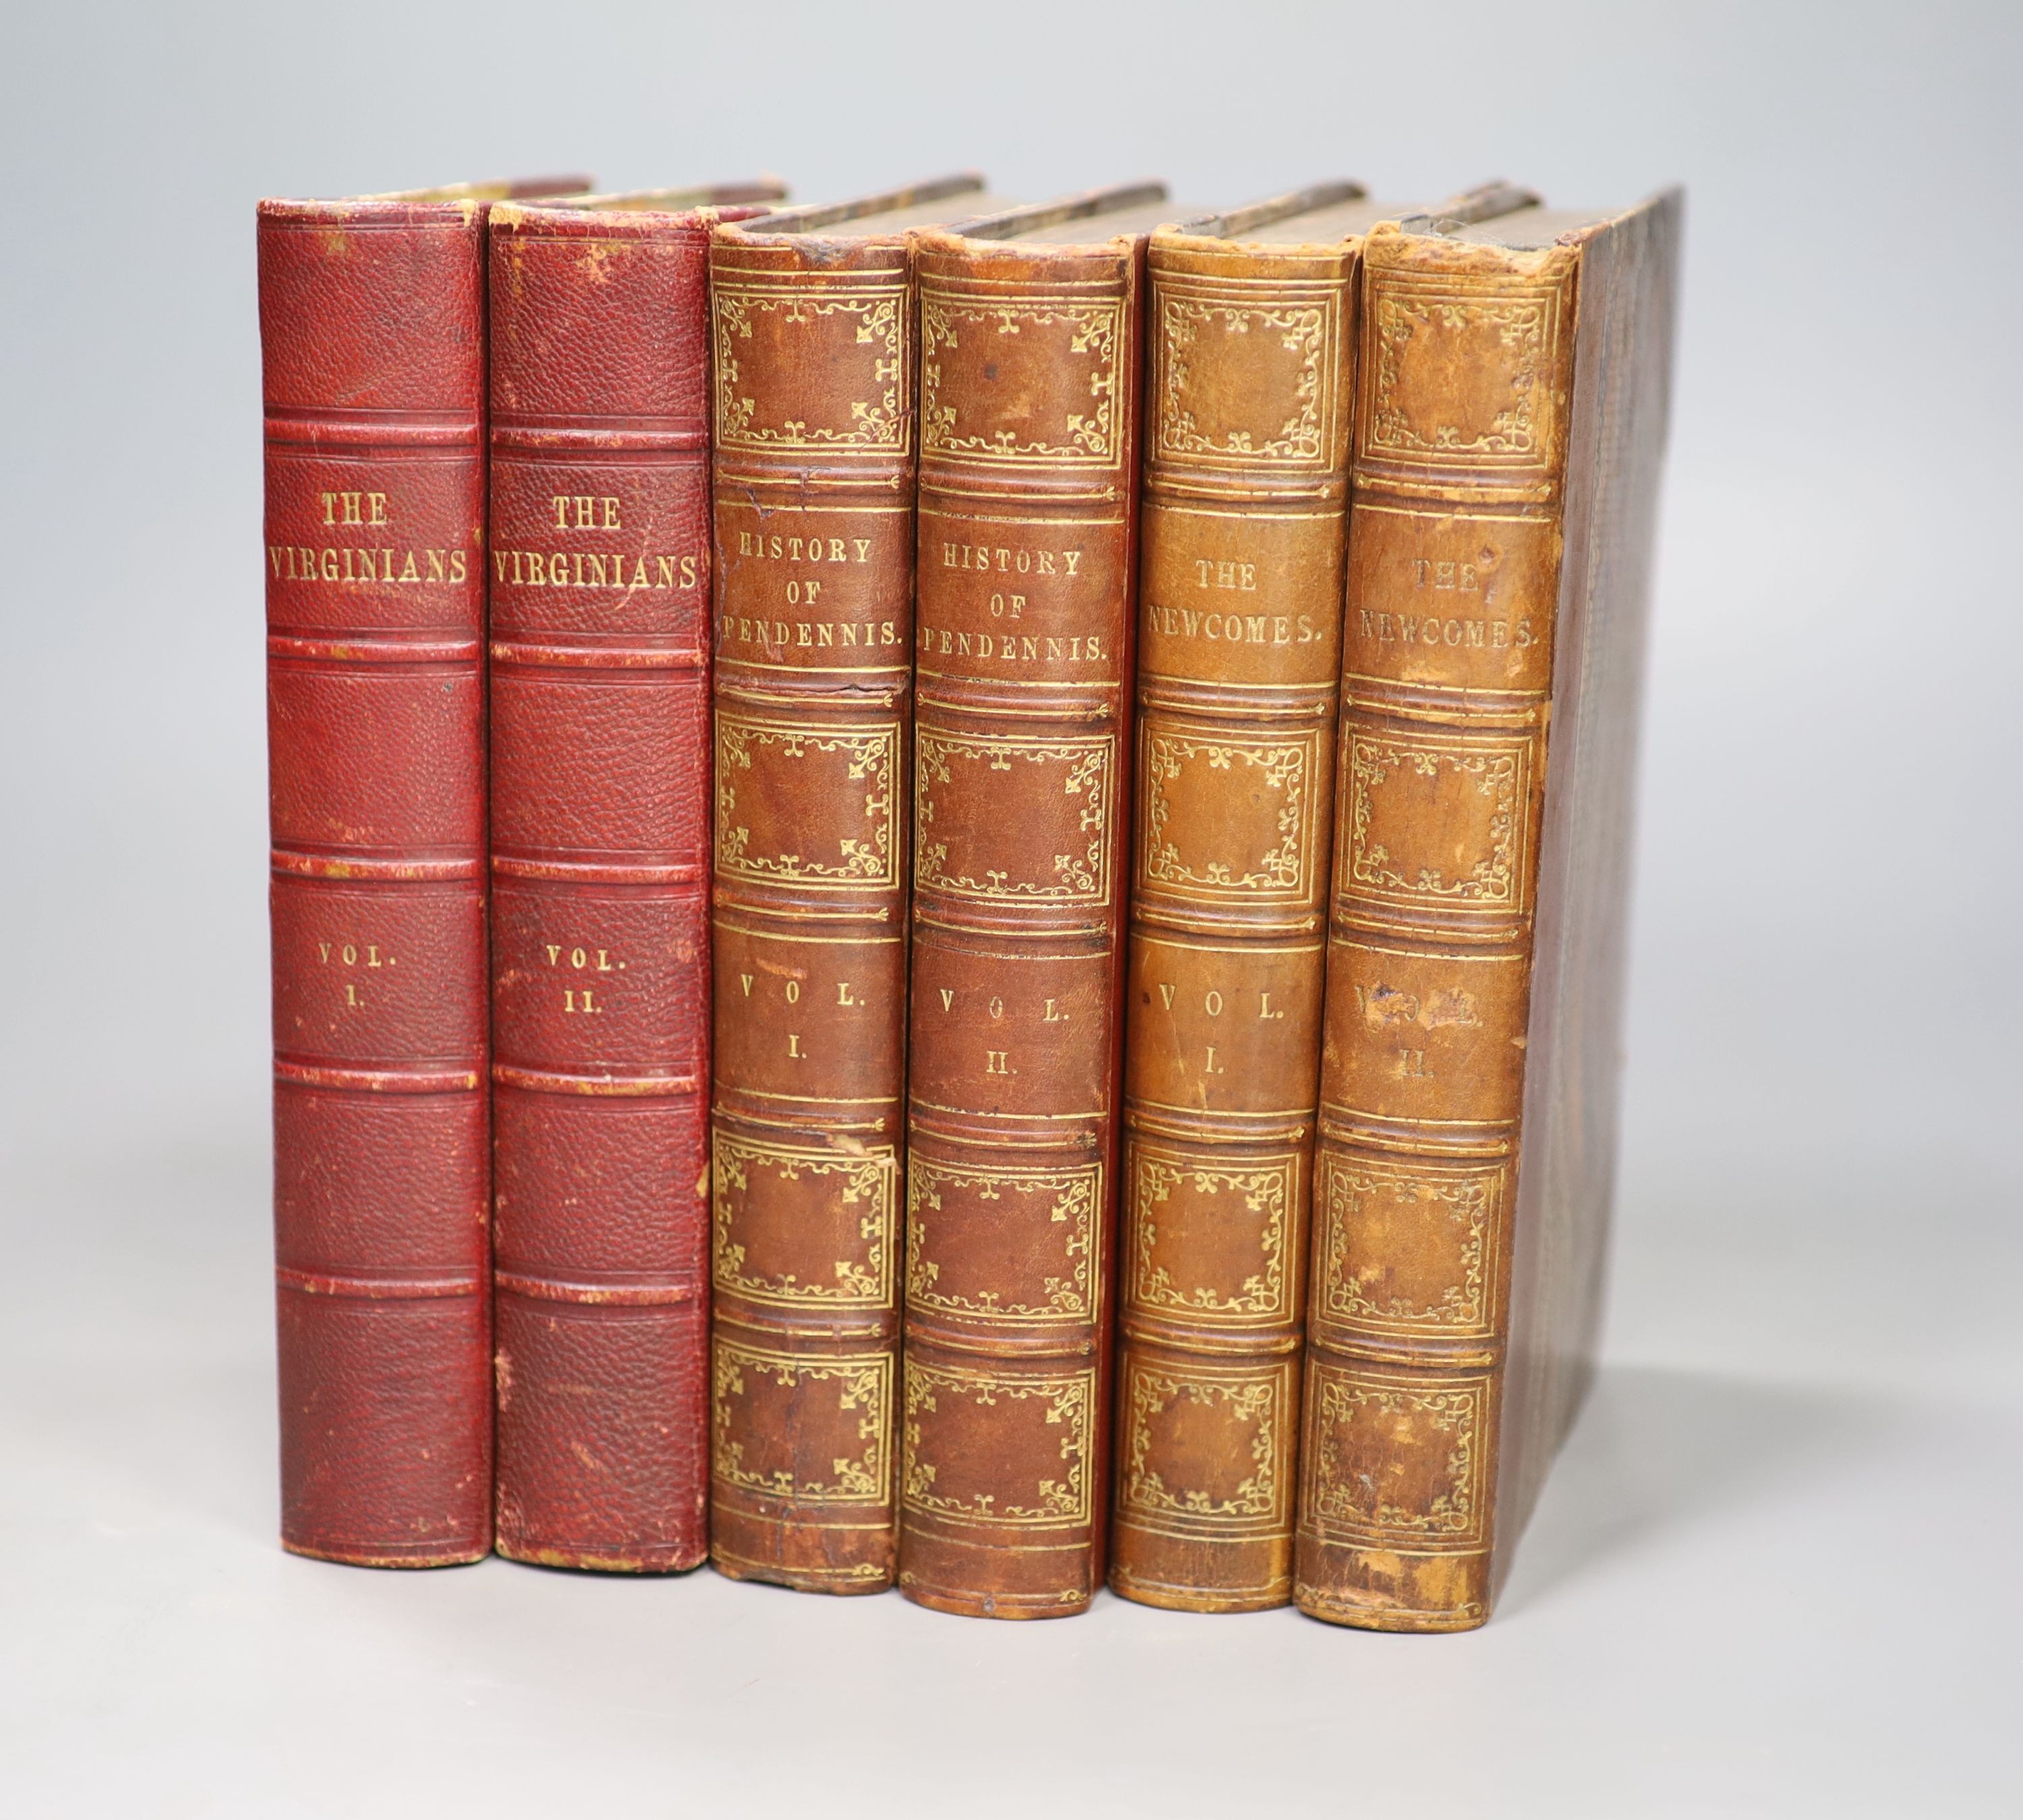 Thackeray, William Makepeace - The Works, 6 vols, 8vo, half red morocco (2) and half calf (4) with marbled boards, early fly leaves, titles and leaves stained, Bradbury and Evans, London, 1849-59